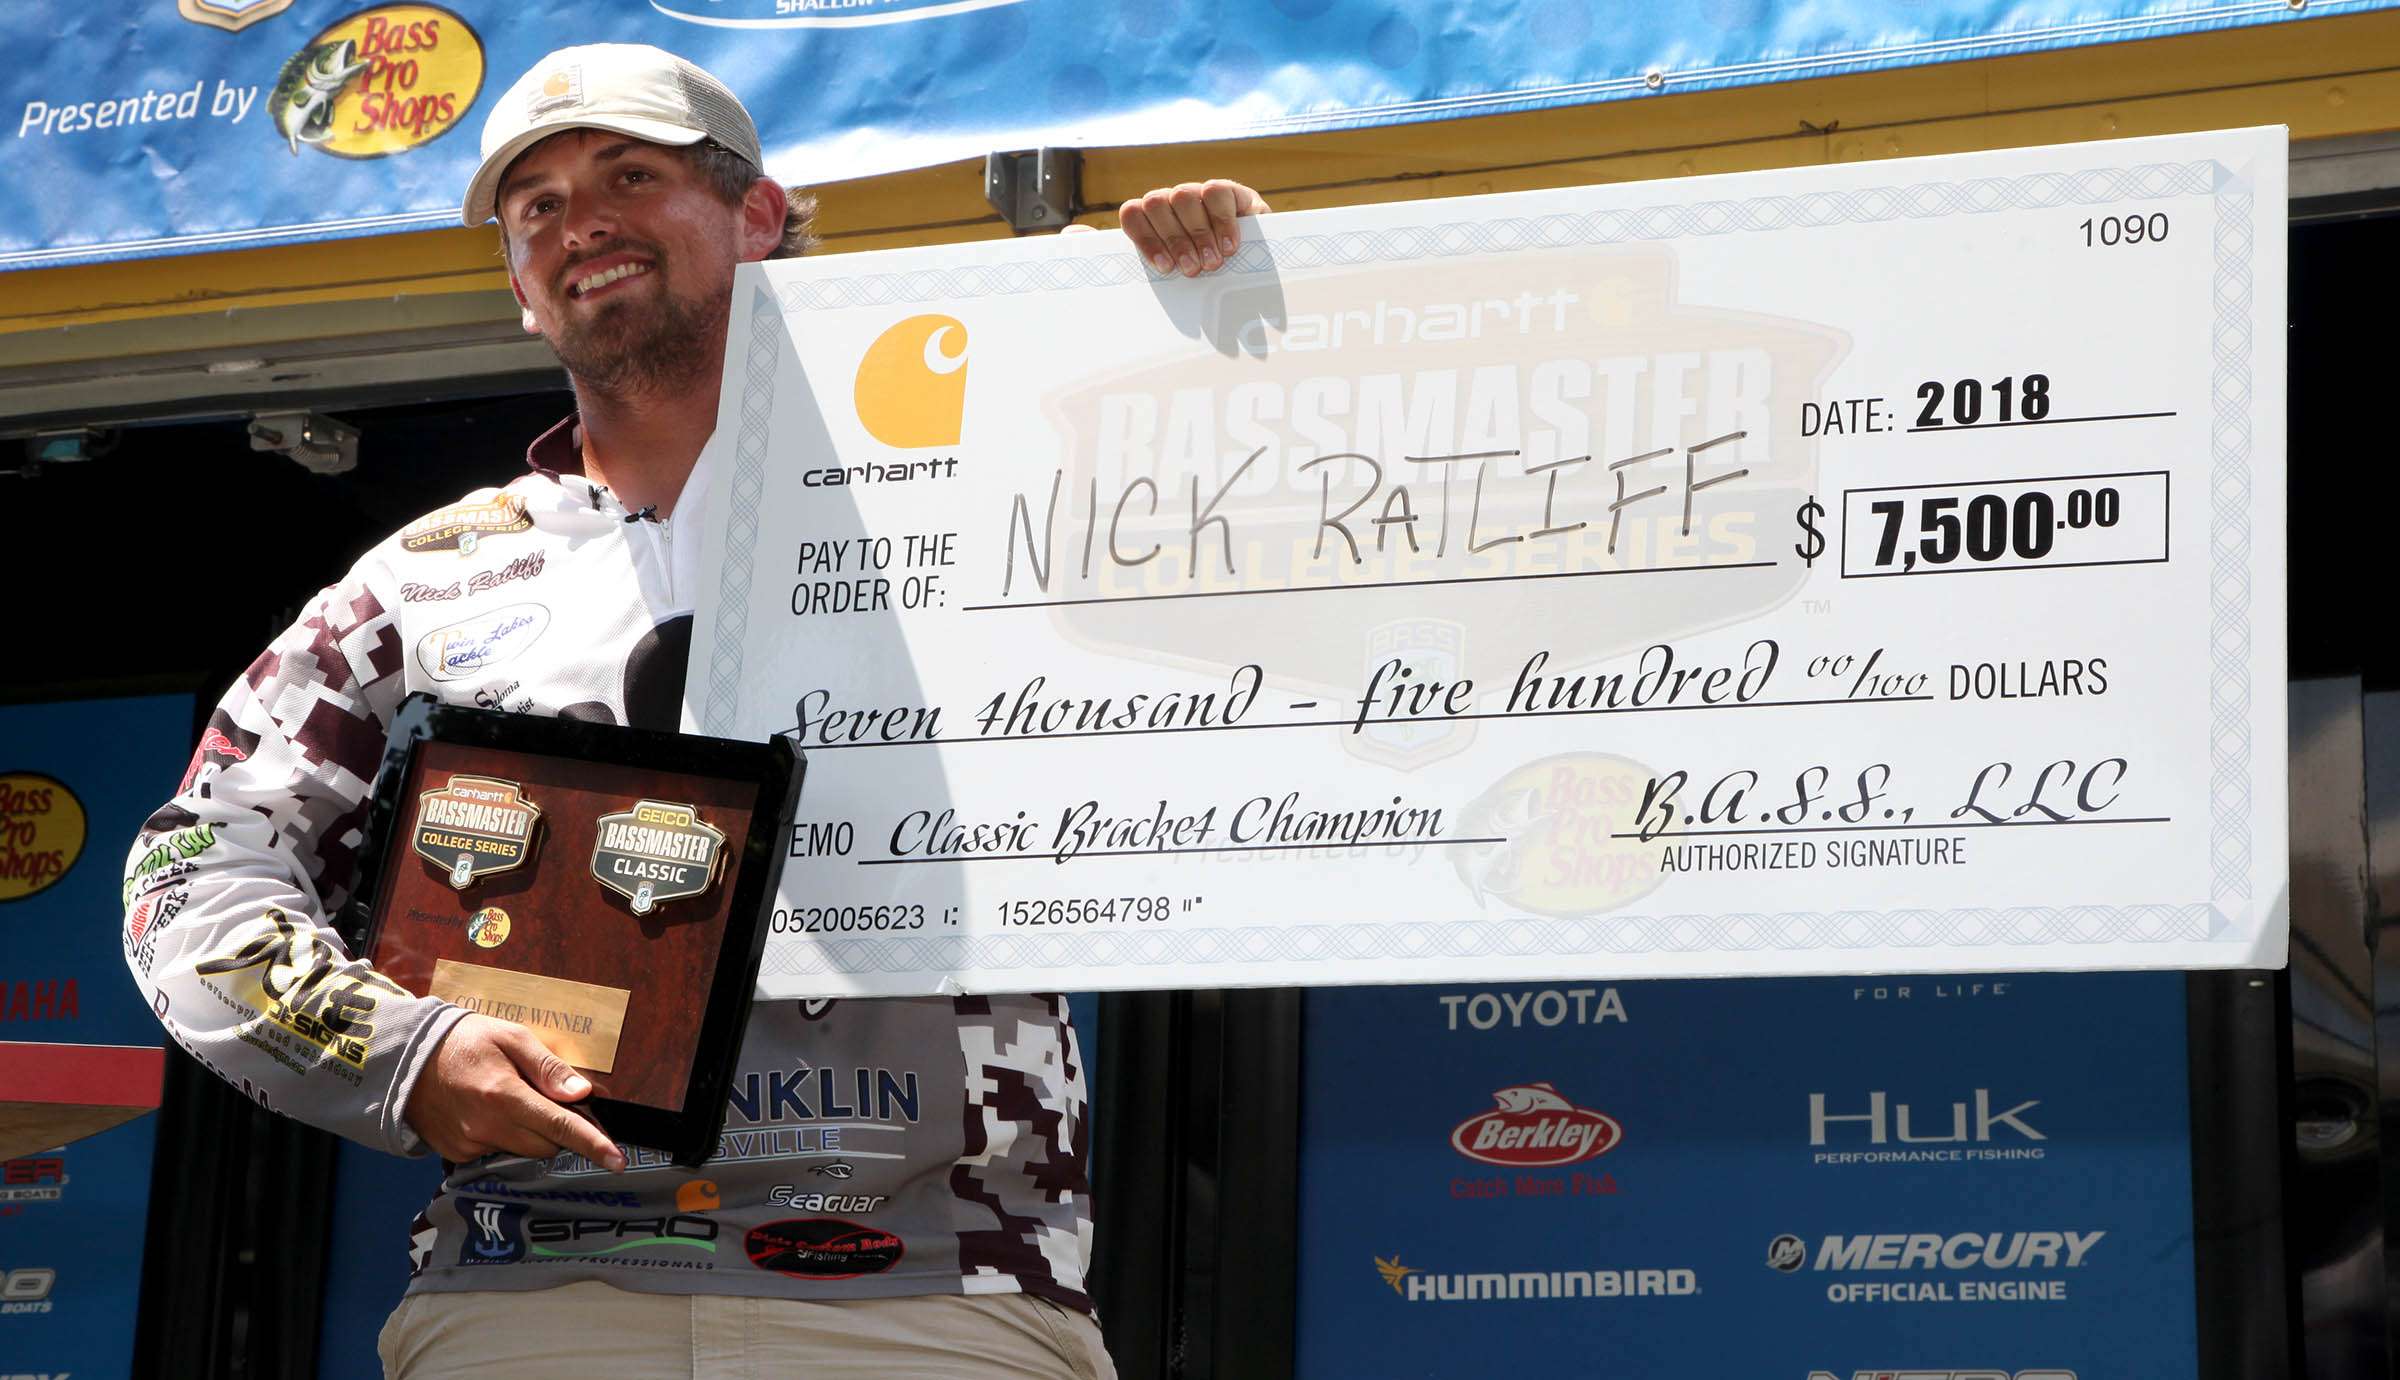 Nick Ratliff (2018 Classic Bracket winner)
Winning the College Classic Bracket meant everything to me. I had pretty much set the goal of winning the Bracket when I was coming out of high school. I wanted to make the classic through College Fishing. Watching the bracket years leading up to my win really stung. One National Championship was on my home lake (Green River) my freshman year and the bracket was on Kentucky Lake a place we had a place on growing up. It meant a lot coming full circle and winning on a fishery I didn't expect to. 